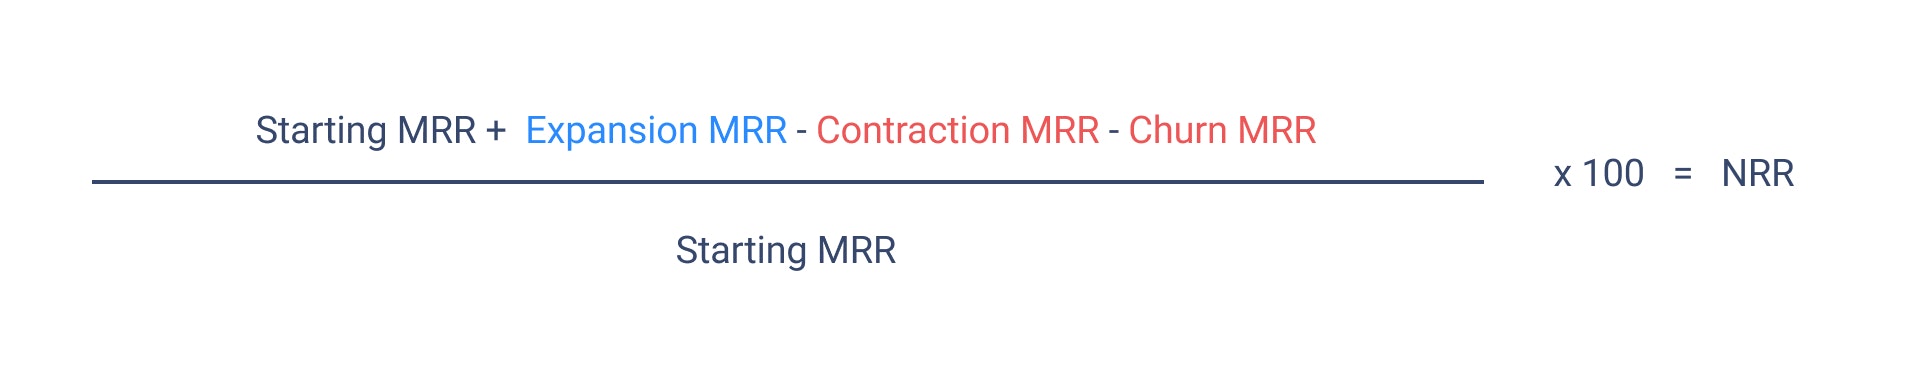 NRR = Starting MRR + Expansion MRR - Contraction MRR - Churn MRR summed and divided by the starting MRR and multiplied by 100